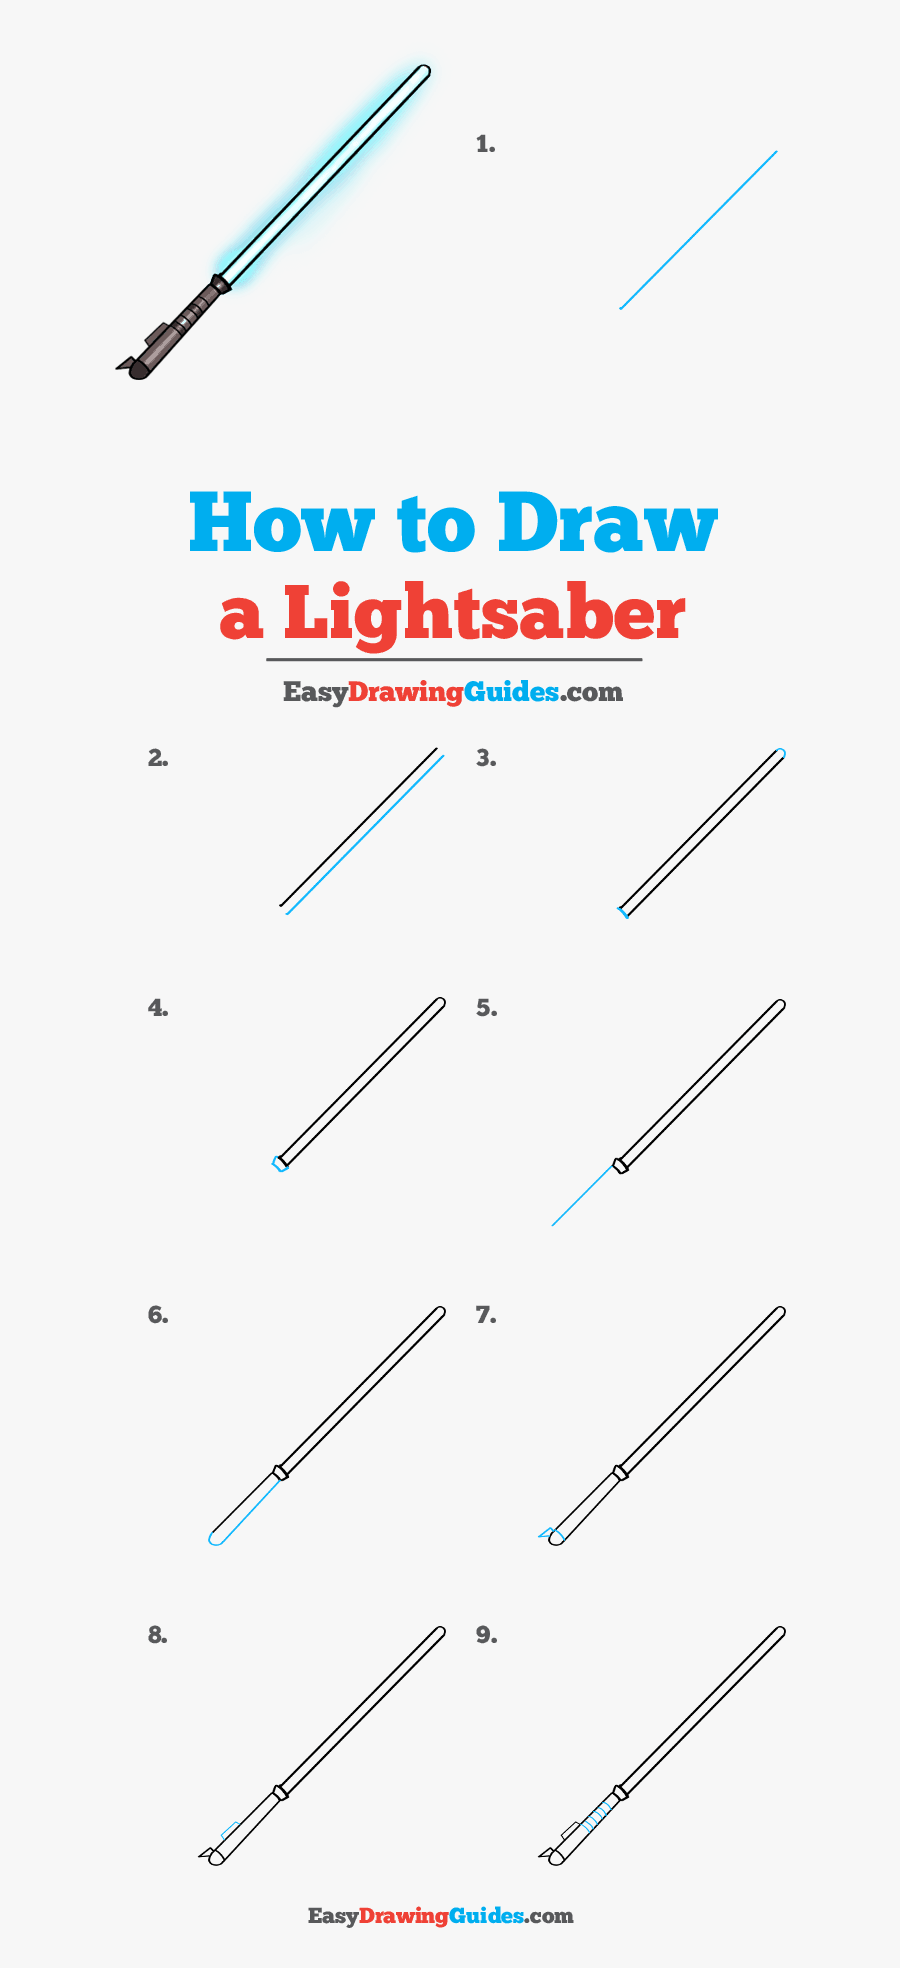 How To Draw Lightsaber - Like Us Follow Us, Transparent Clipart